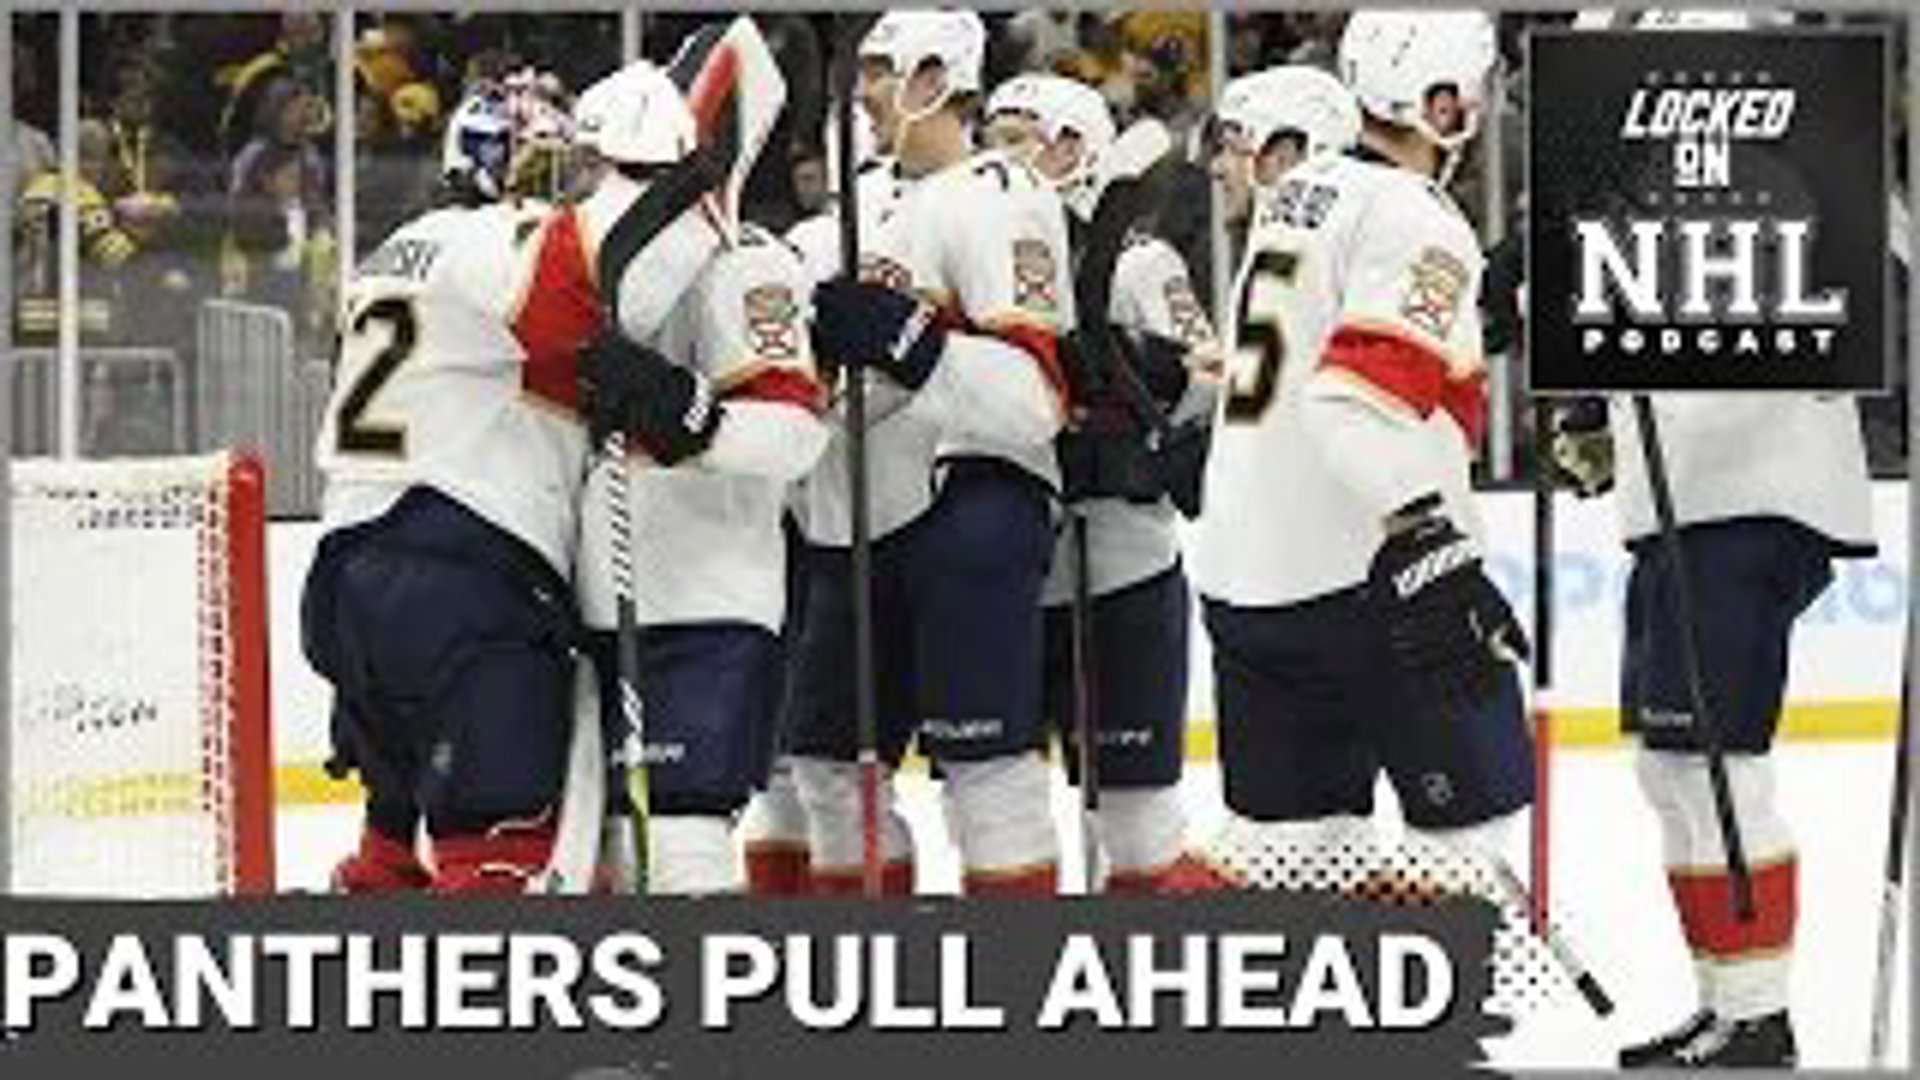 The Florida Panthers overcame an early 2-0 deficit to defeat the Boston Bruins 3-2 and take a commanding 3-1 lead in their Stanley Cup Playoff series.